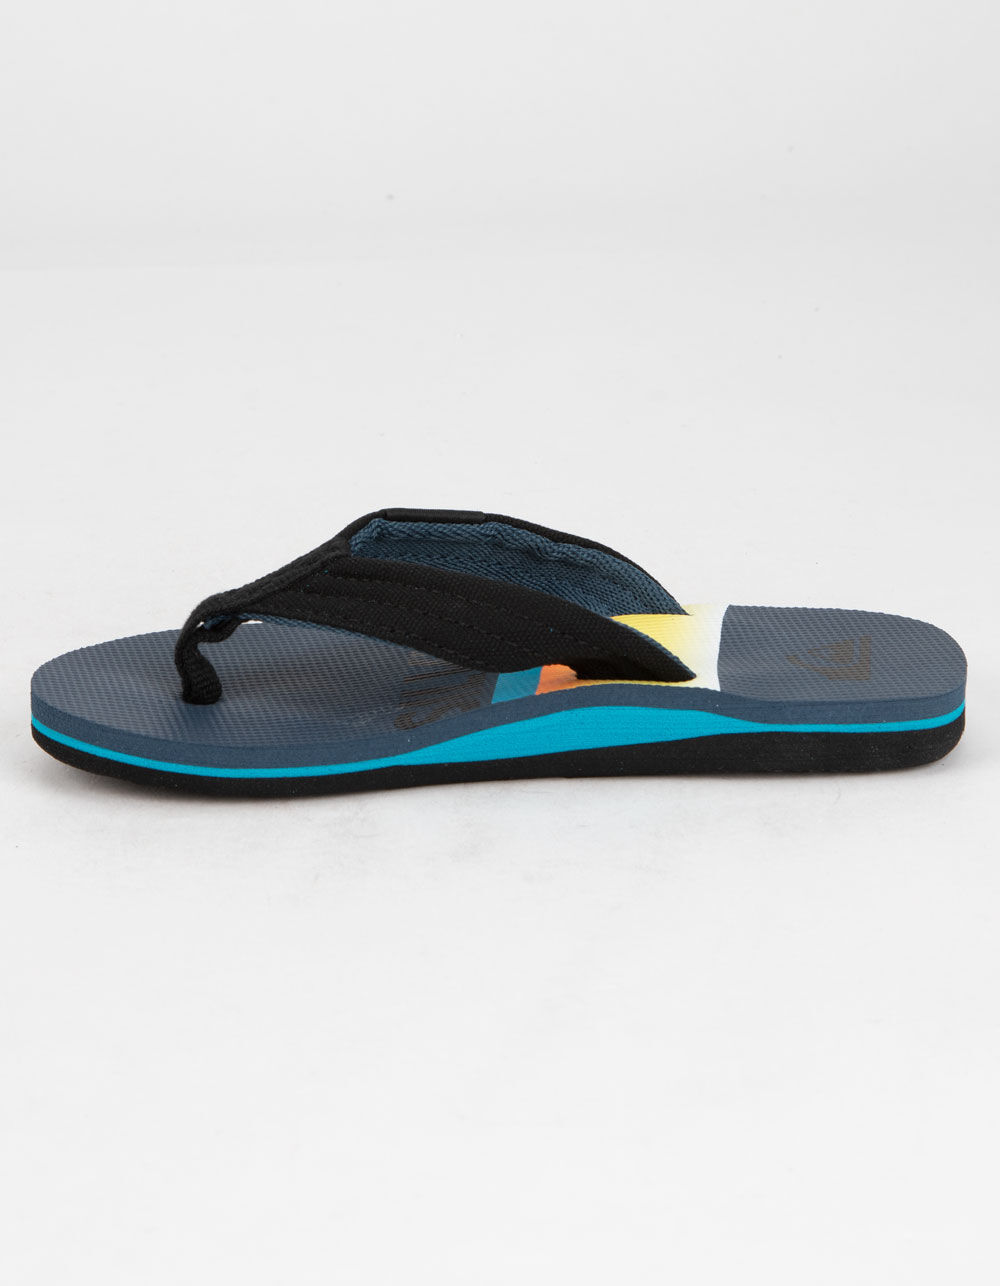 QUIKSILVER Molokai Layback Boys Sandals image number 3